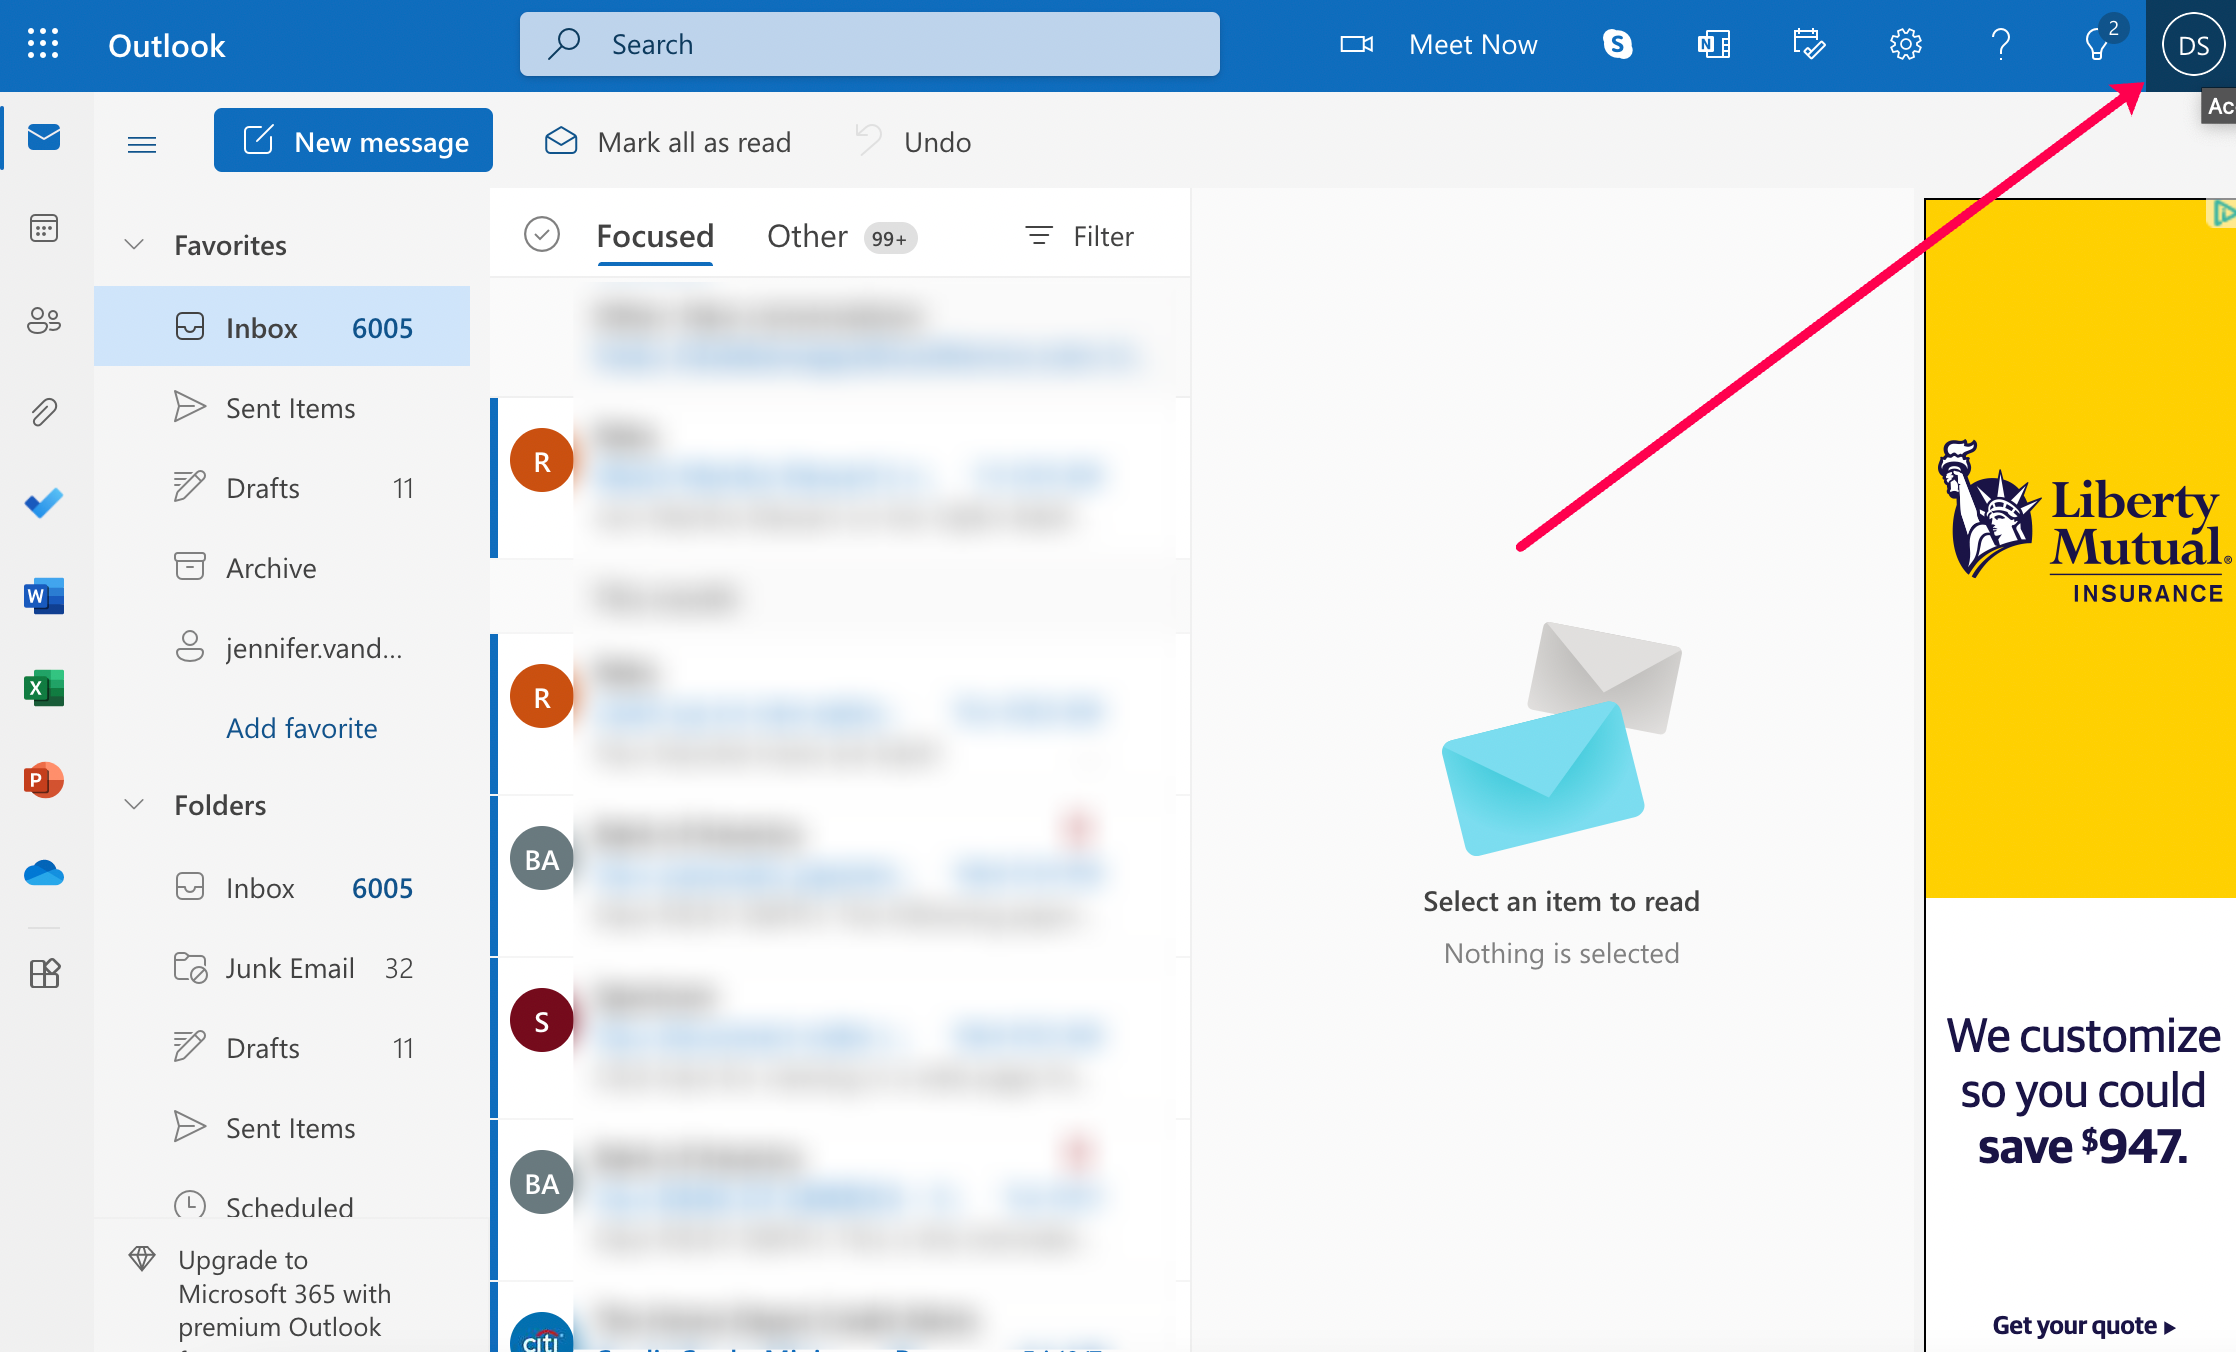 Hotmail login update: How to upgrade existing hotmail account to  outlook.com email